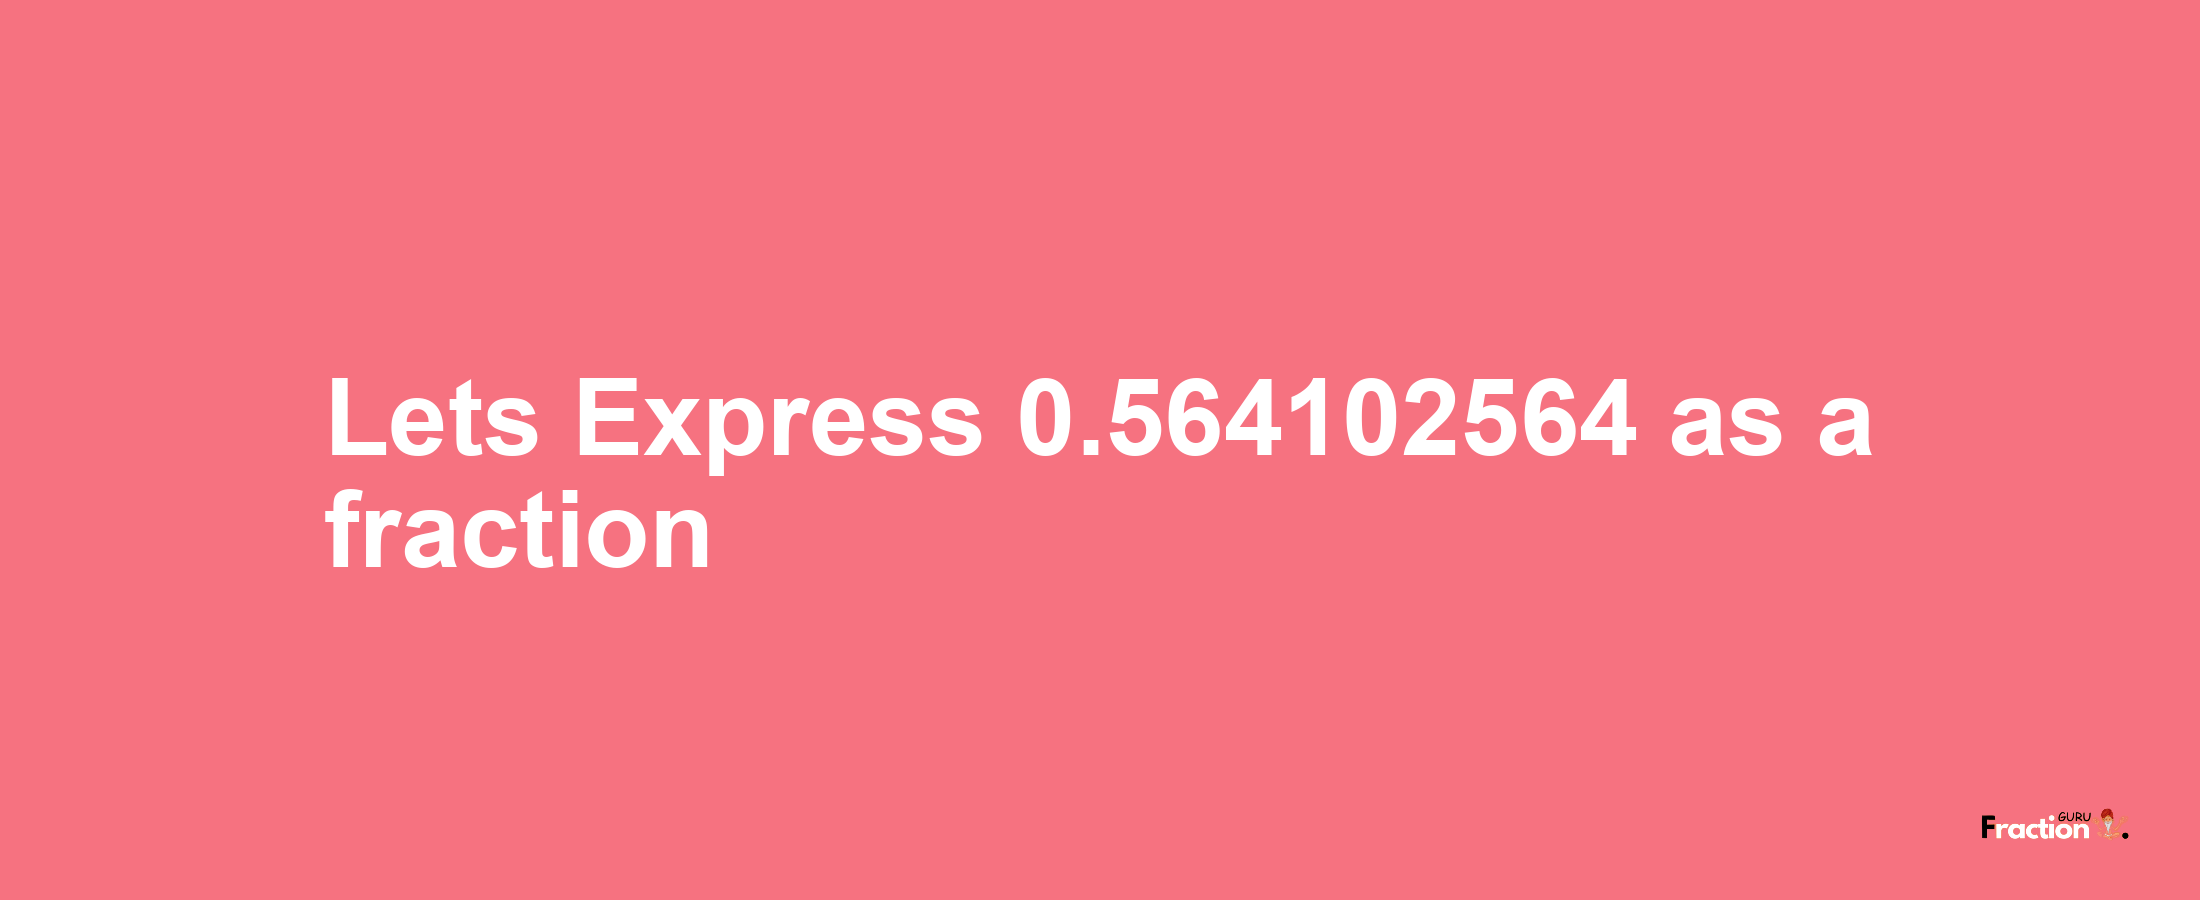 Lets Express 0.564102564 as afraction